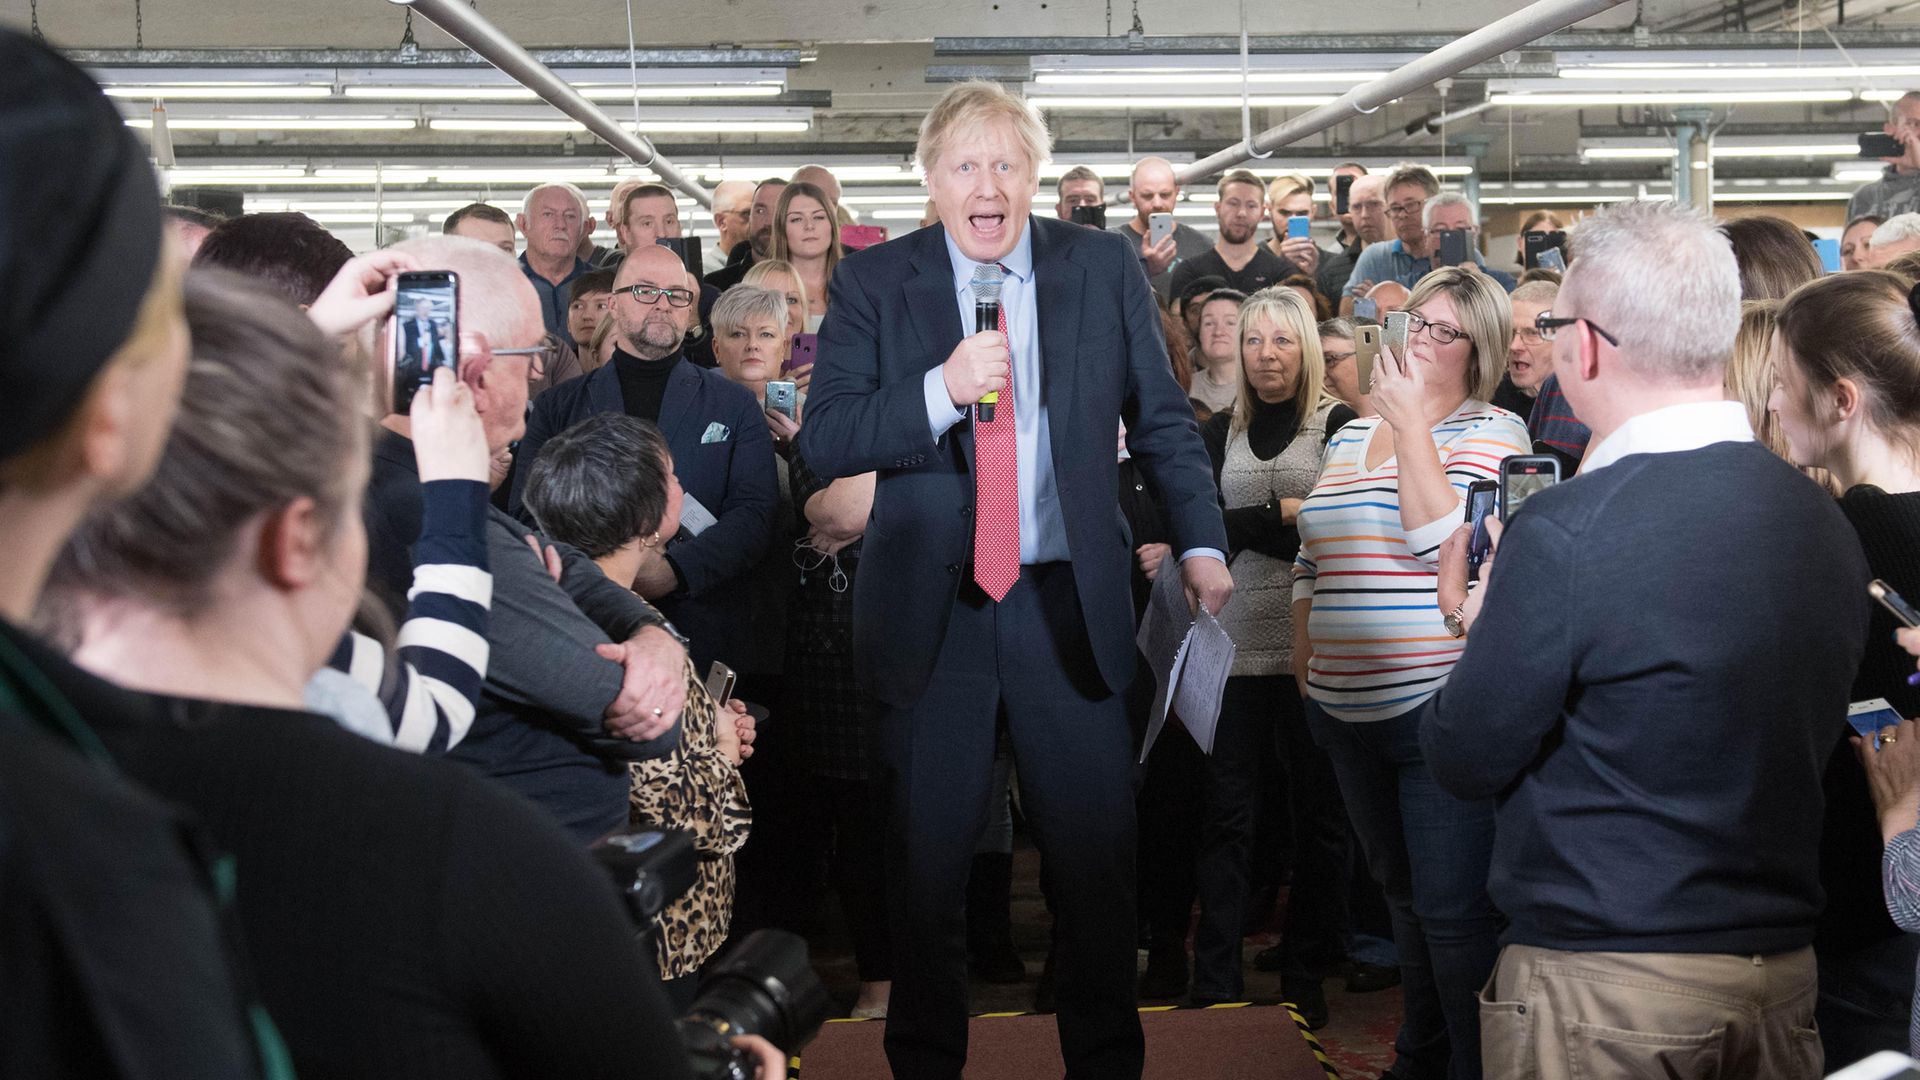 Boris Johnson during a visit to the John Smedley Mill in Derbyshire - Credit: PA